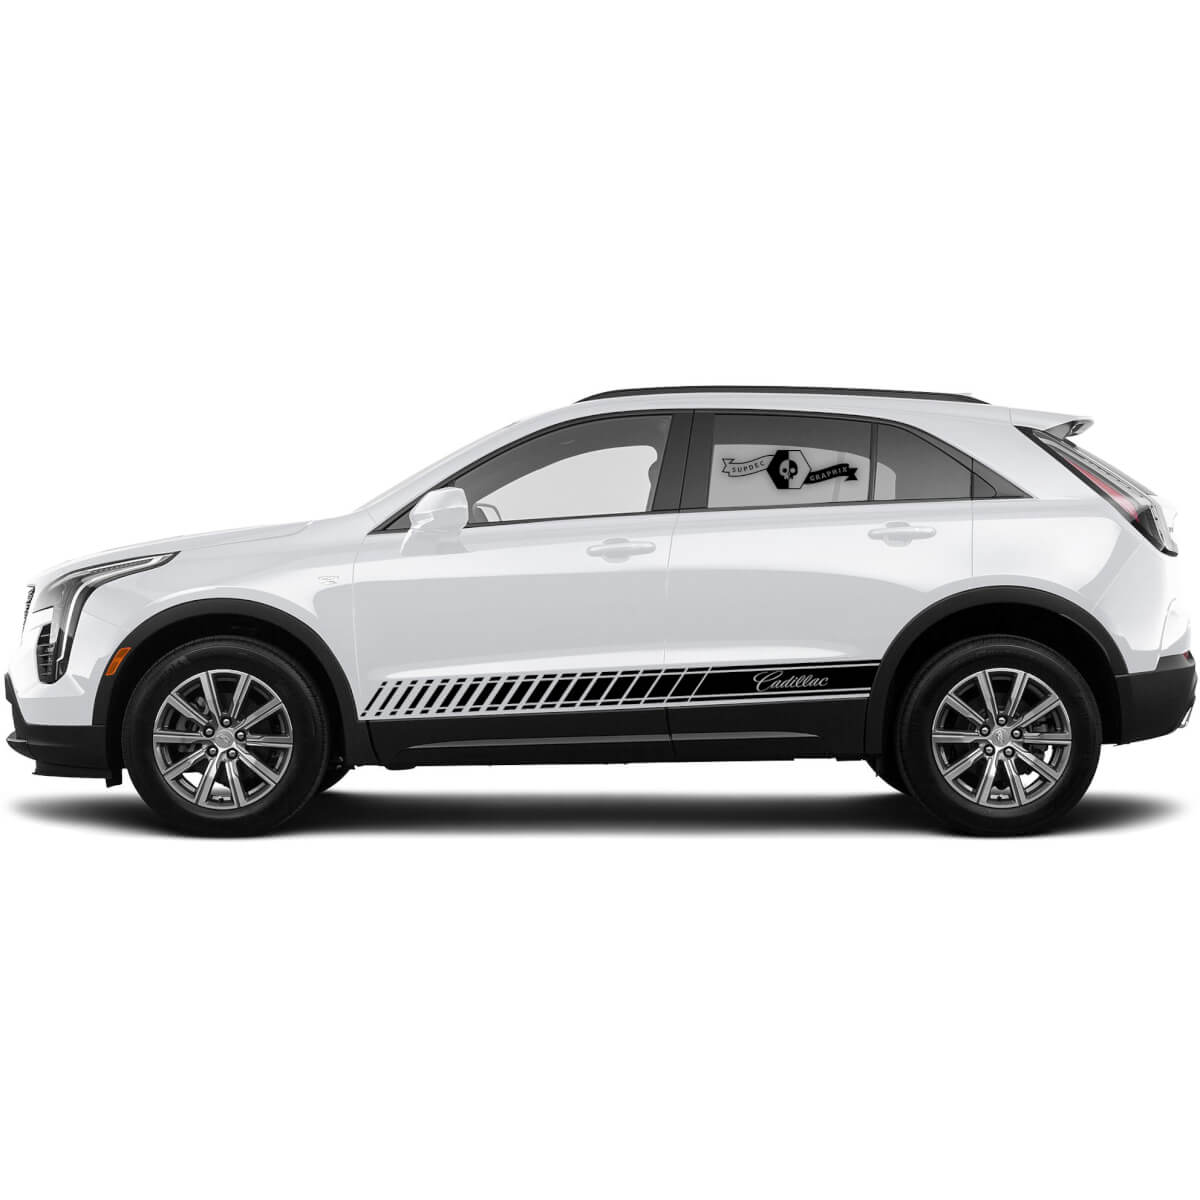 2 New Decal Rocker Panel Sticker Lines Oblique Lines Classic Stripe for Cadillac XT4
